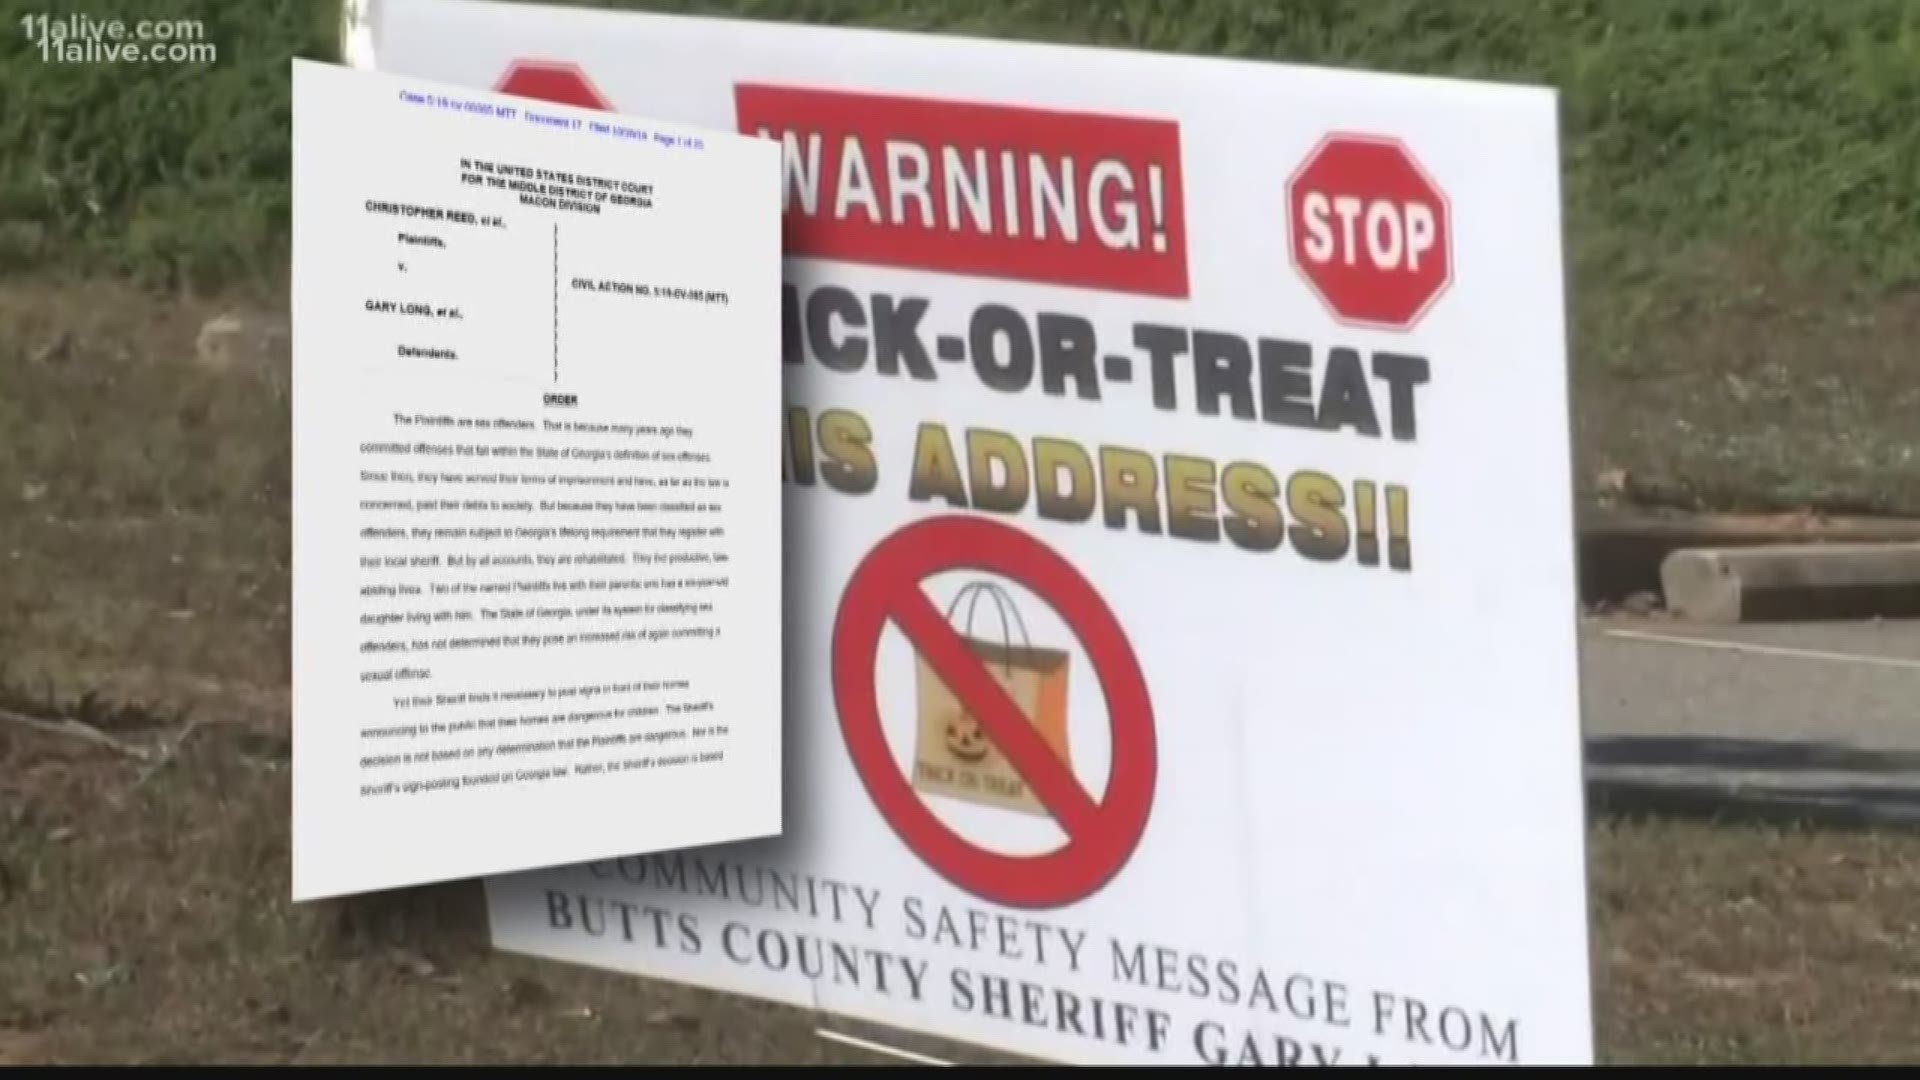 A federal judge has issued a ruling favoring - in part - three registered sex offenders who sued the Butts County Sheriff, calling the "no trick-or-treat" signs the